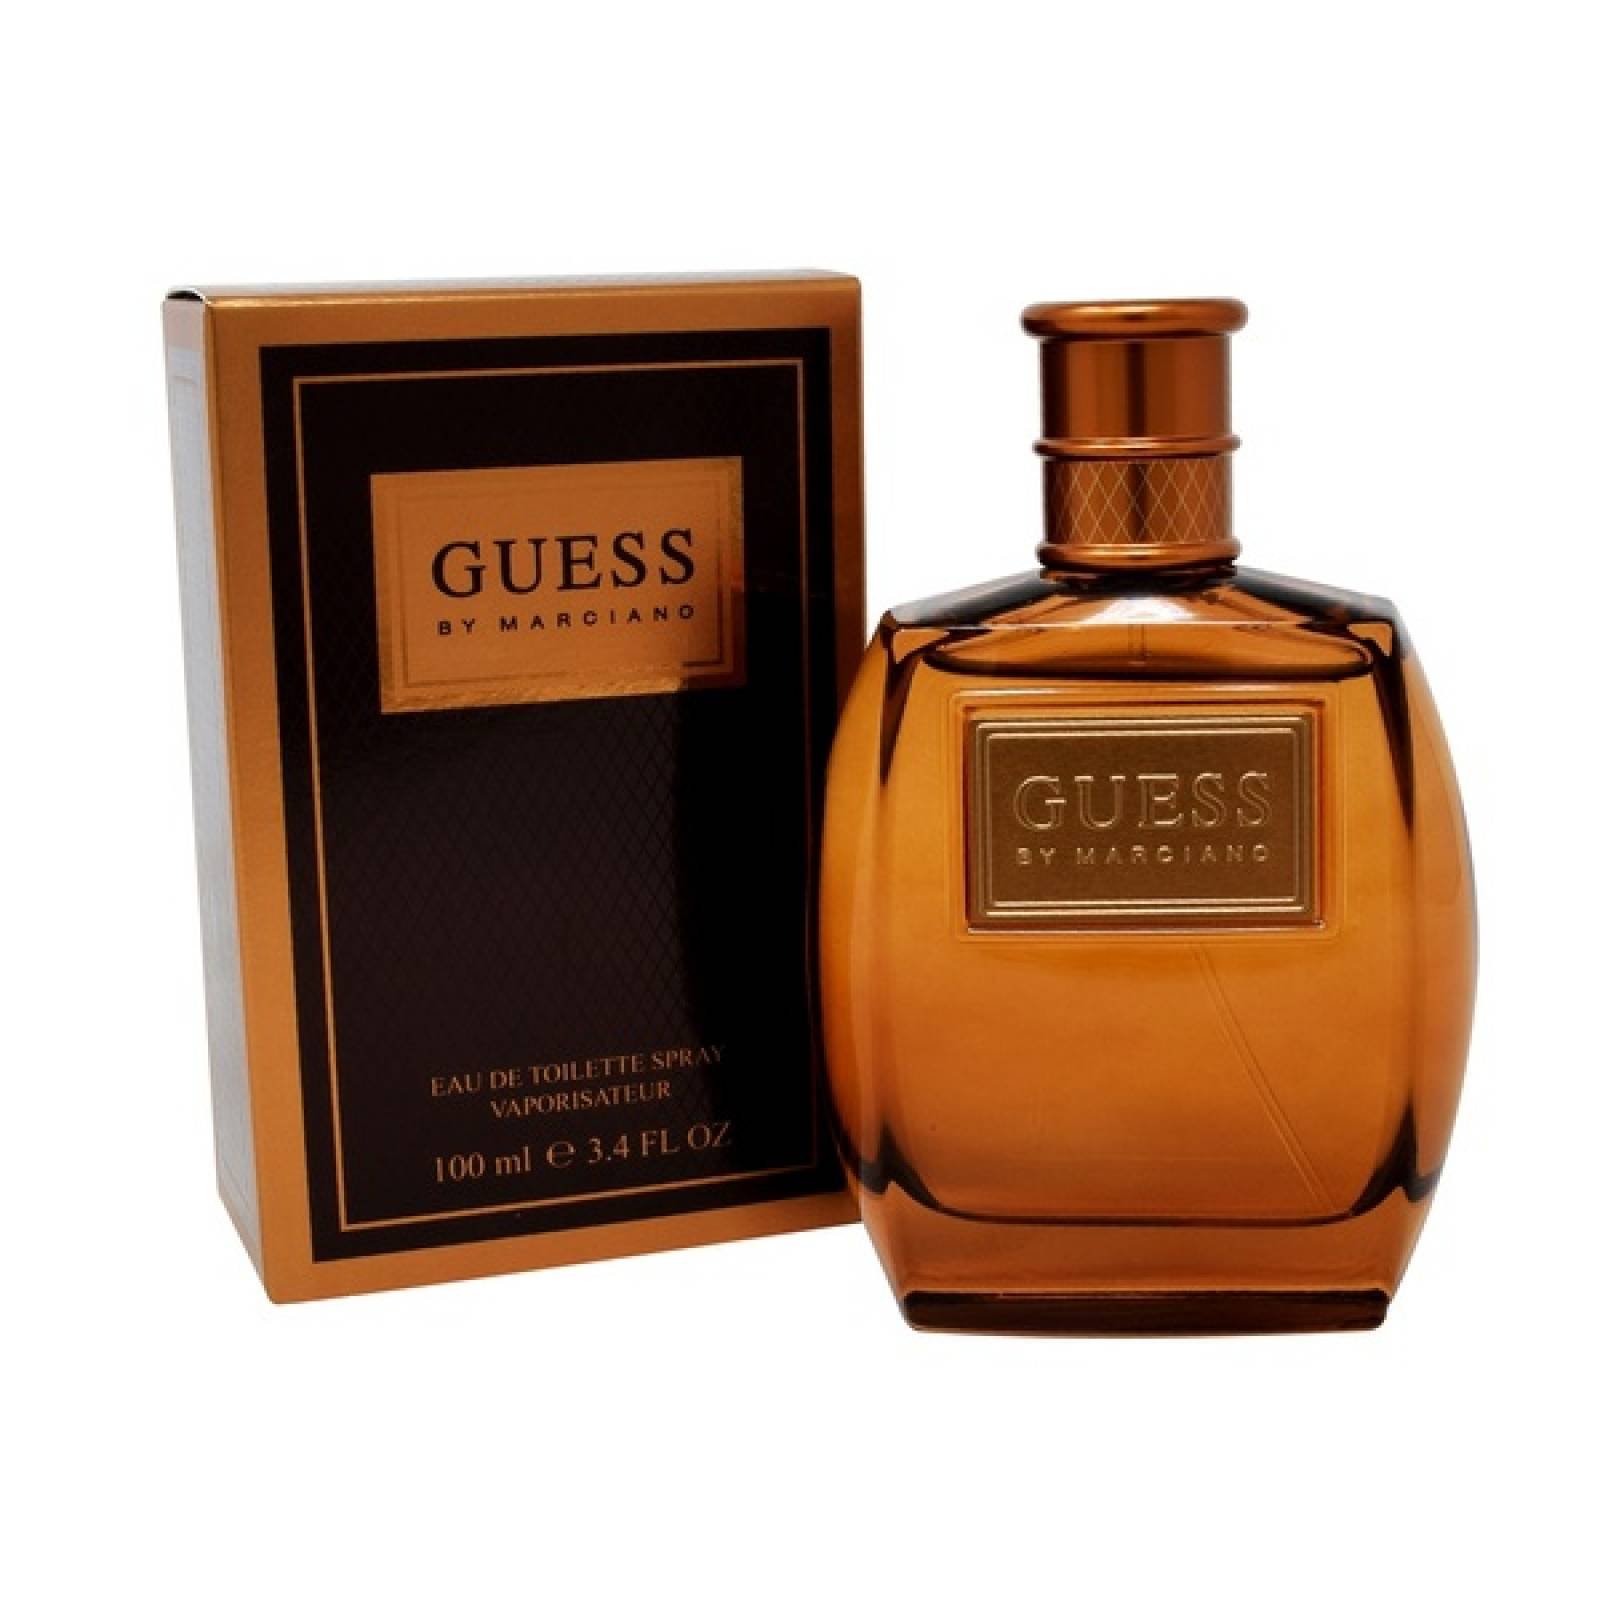 GUESS BY MARCIANO 100ML EDT SPRAY CABALLERO